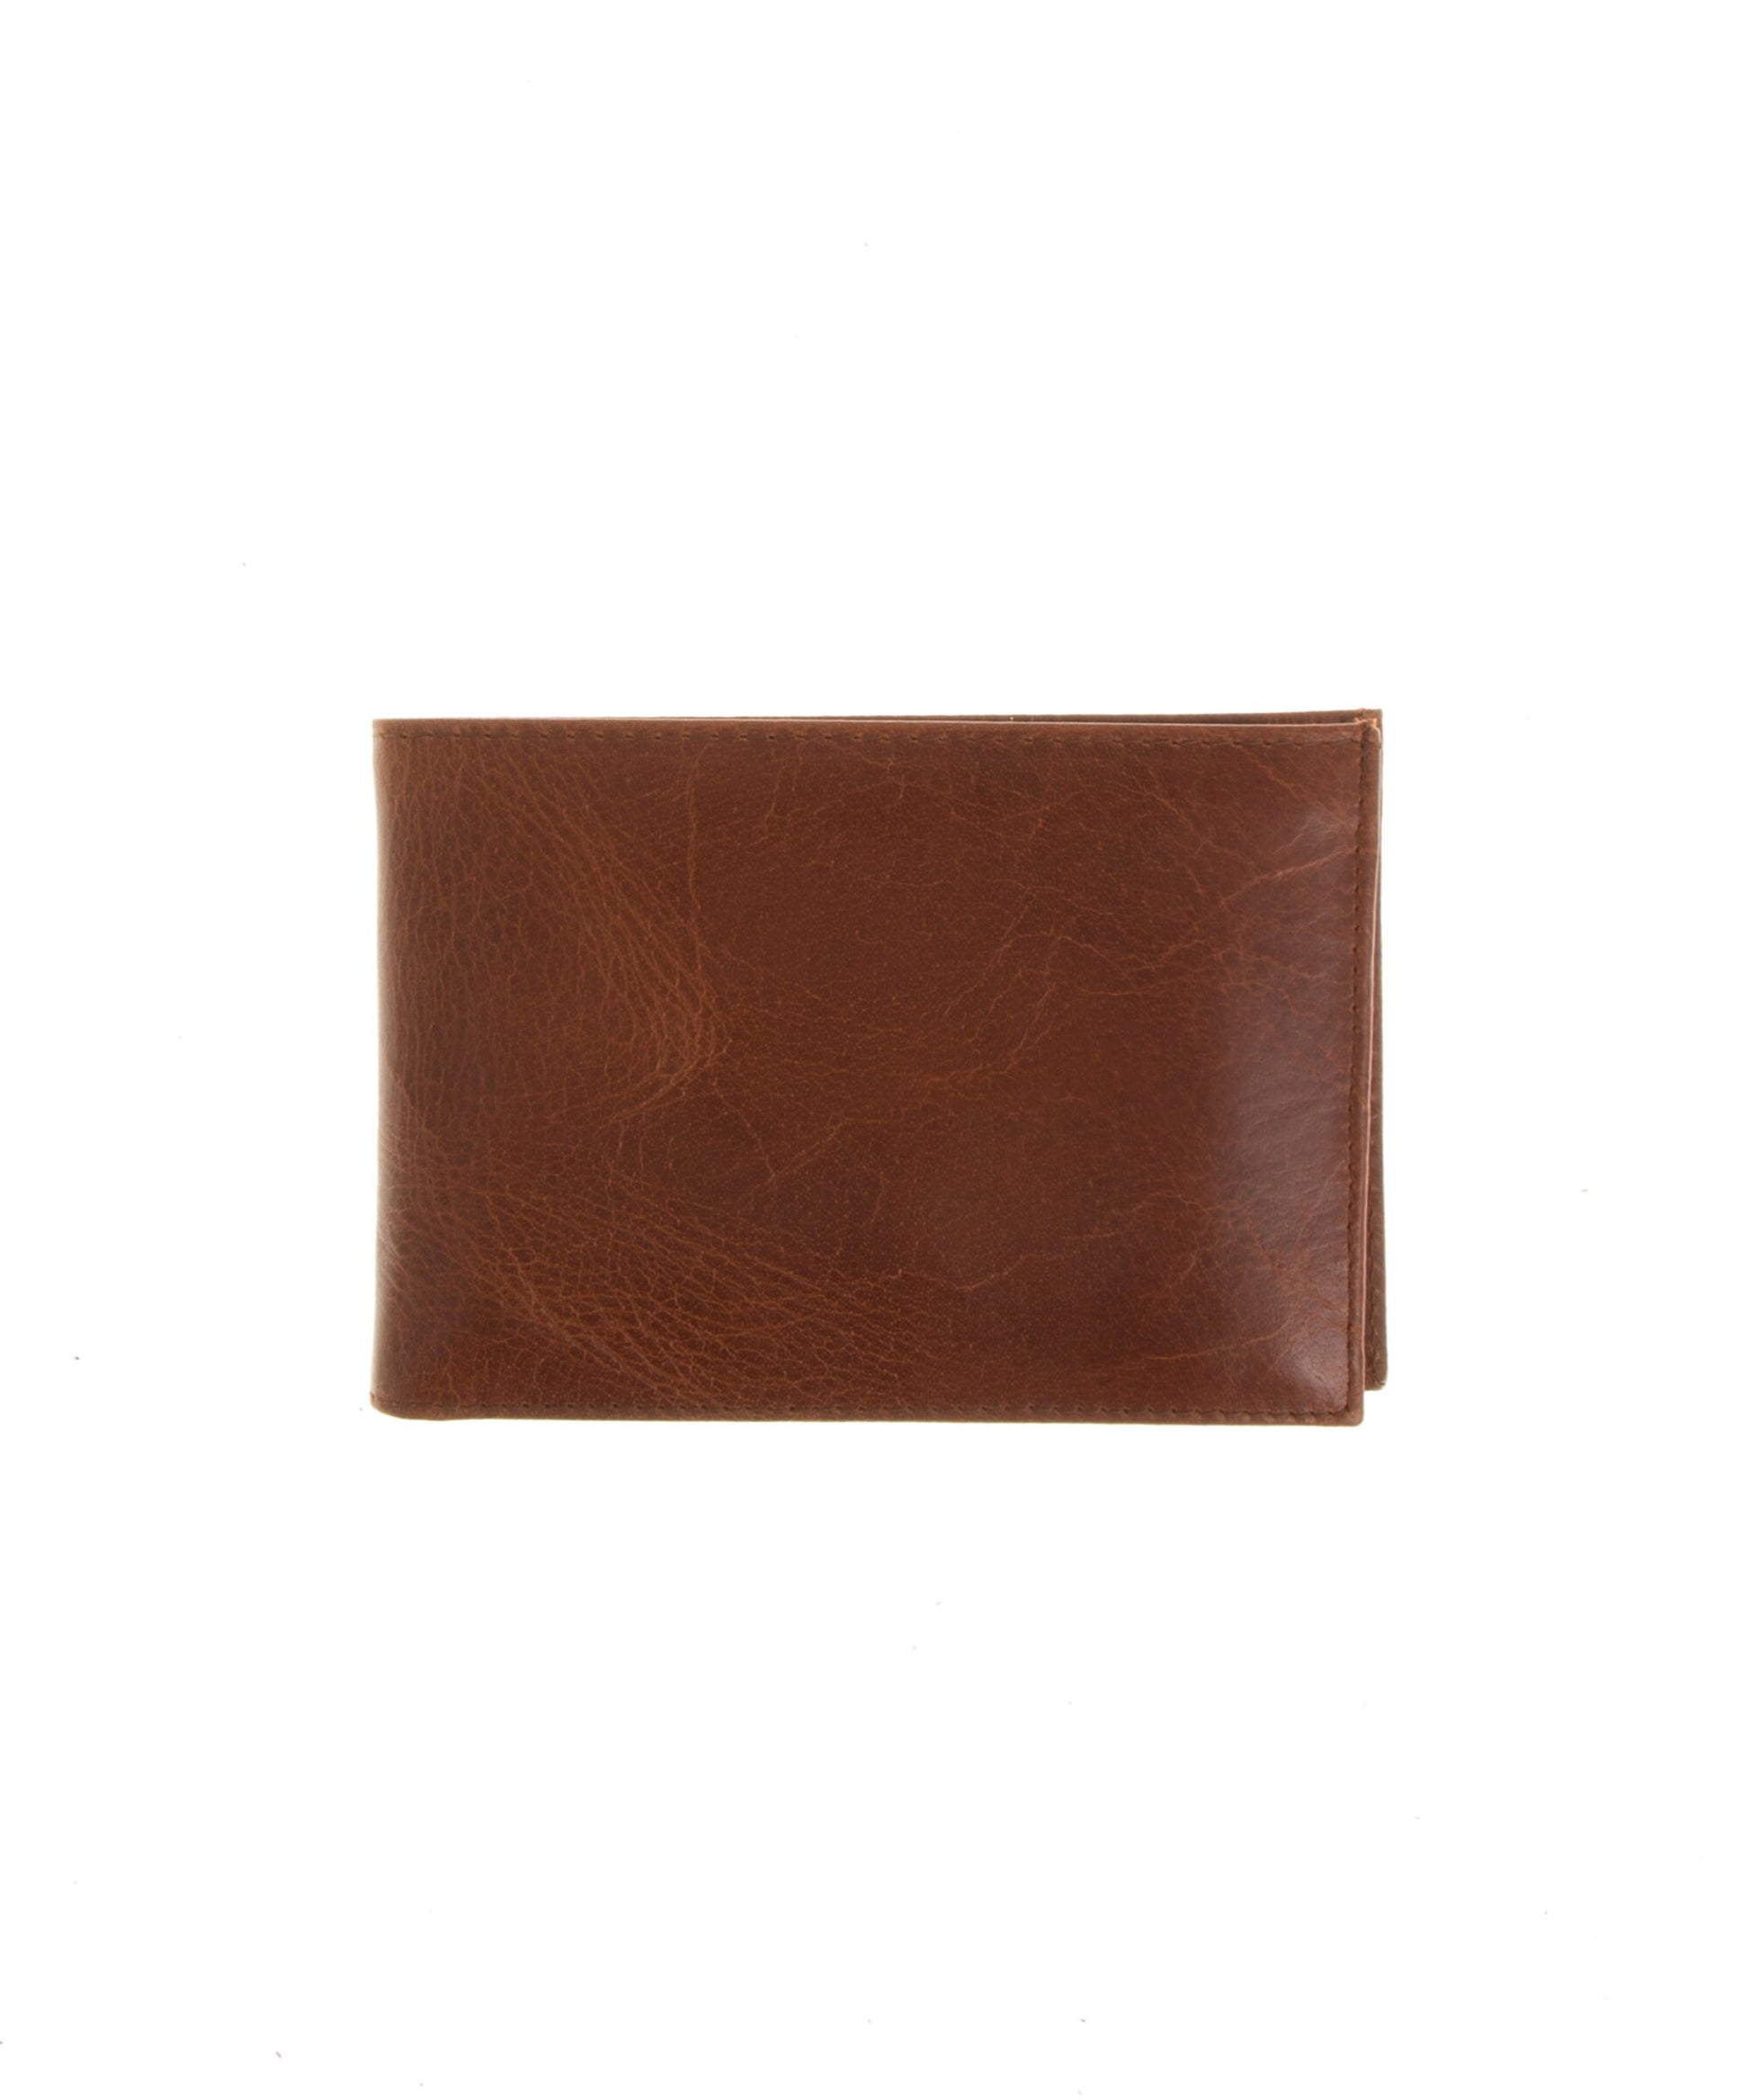 Full grain mens leather wallet, Minimalist genuine leather wallet, Bifold travel wallet men, Men's leather accessories